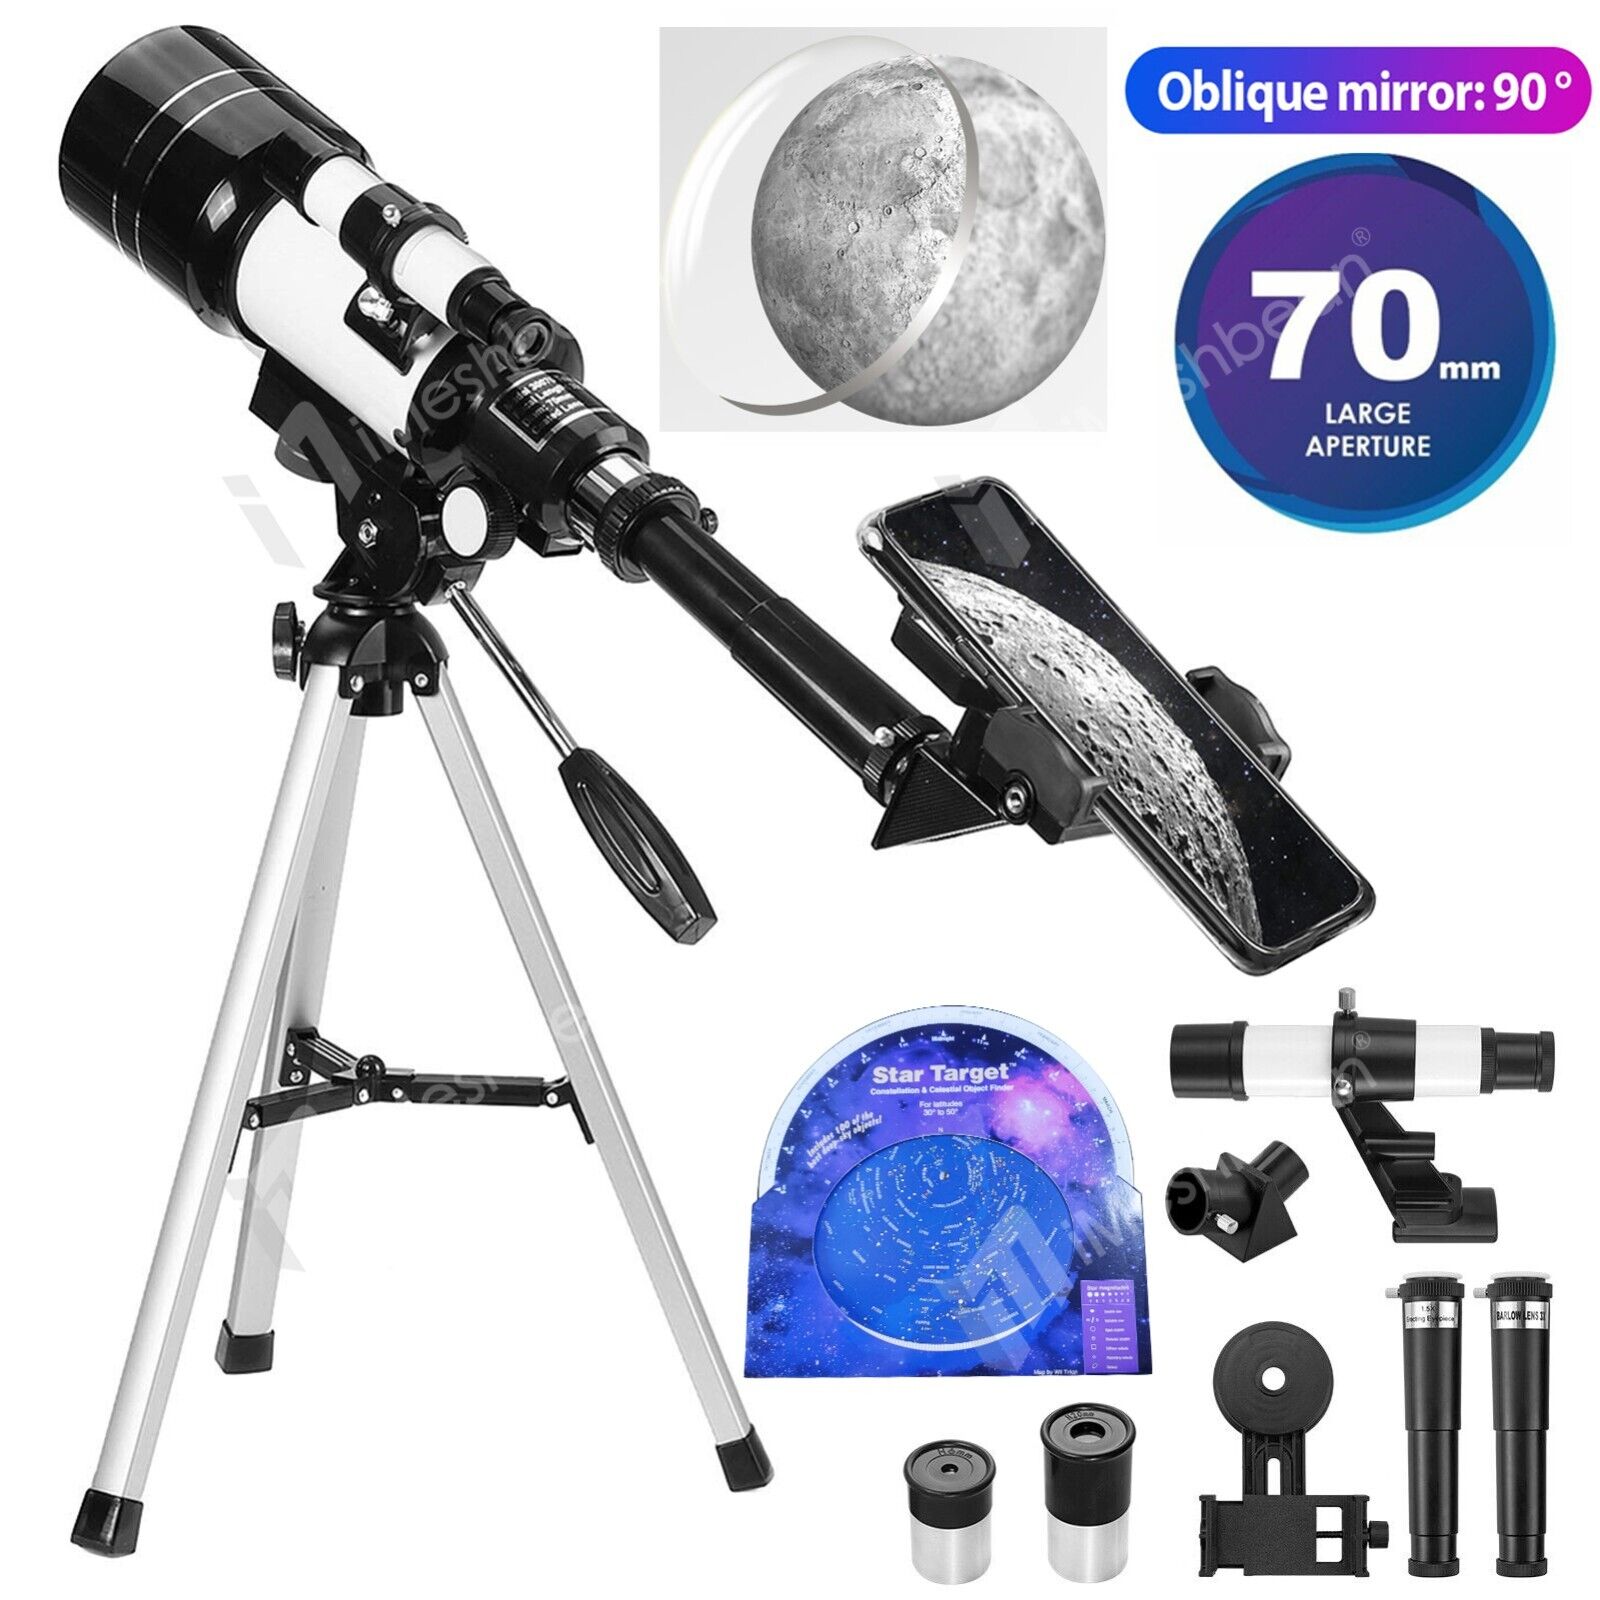 300/70mm Professional Astronomical Telescope Refractor Night View for Star Moon